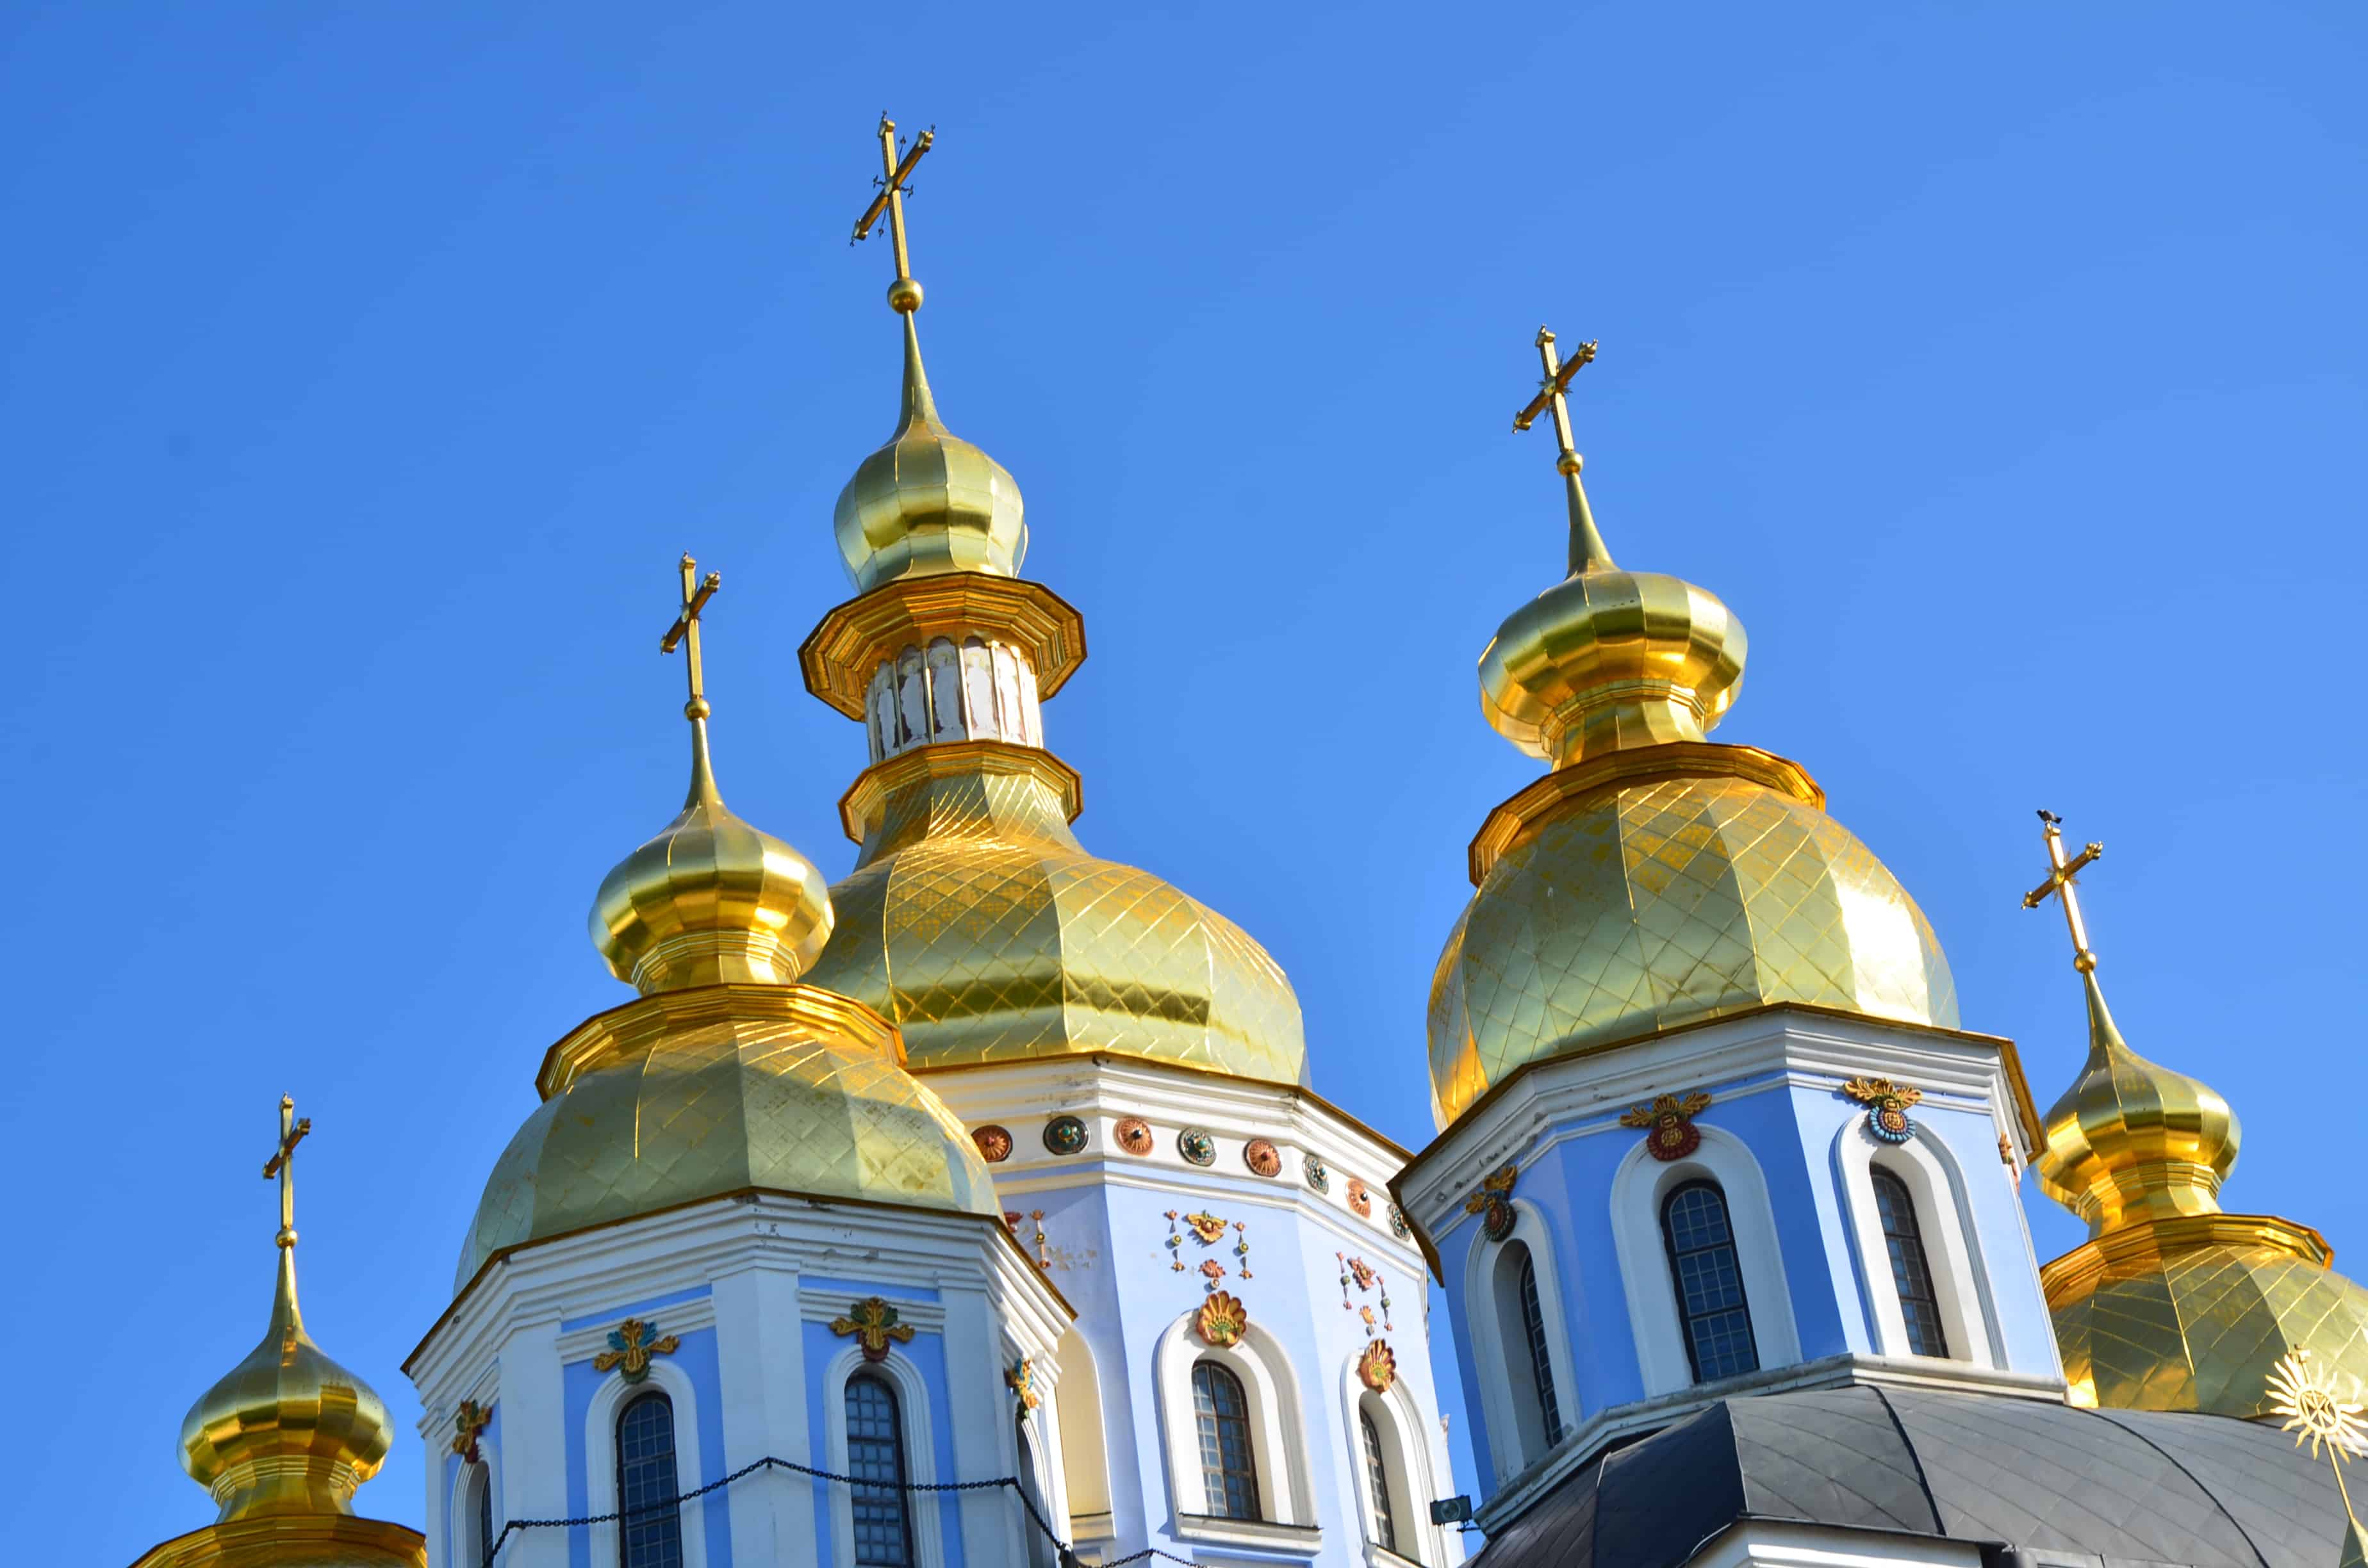 St. Michael's Golden-Domed Cathedral at St. Michael's Golden-Domed Monastery in Kyiv, Ukraine